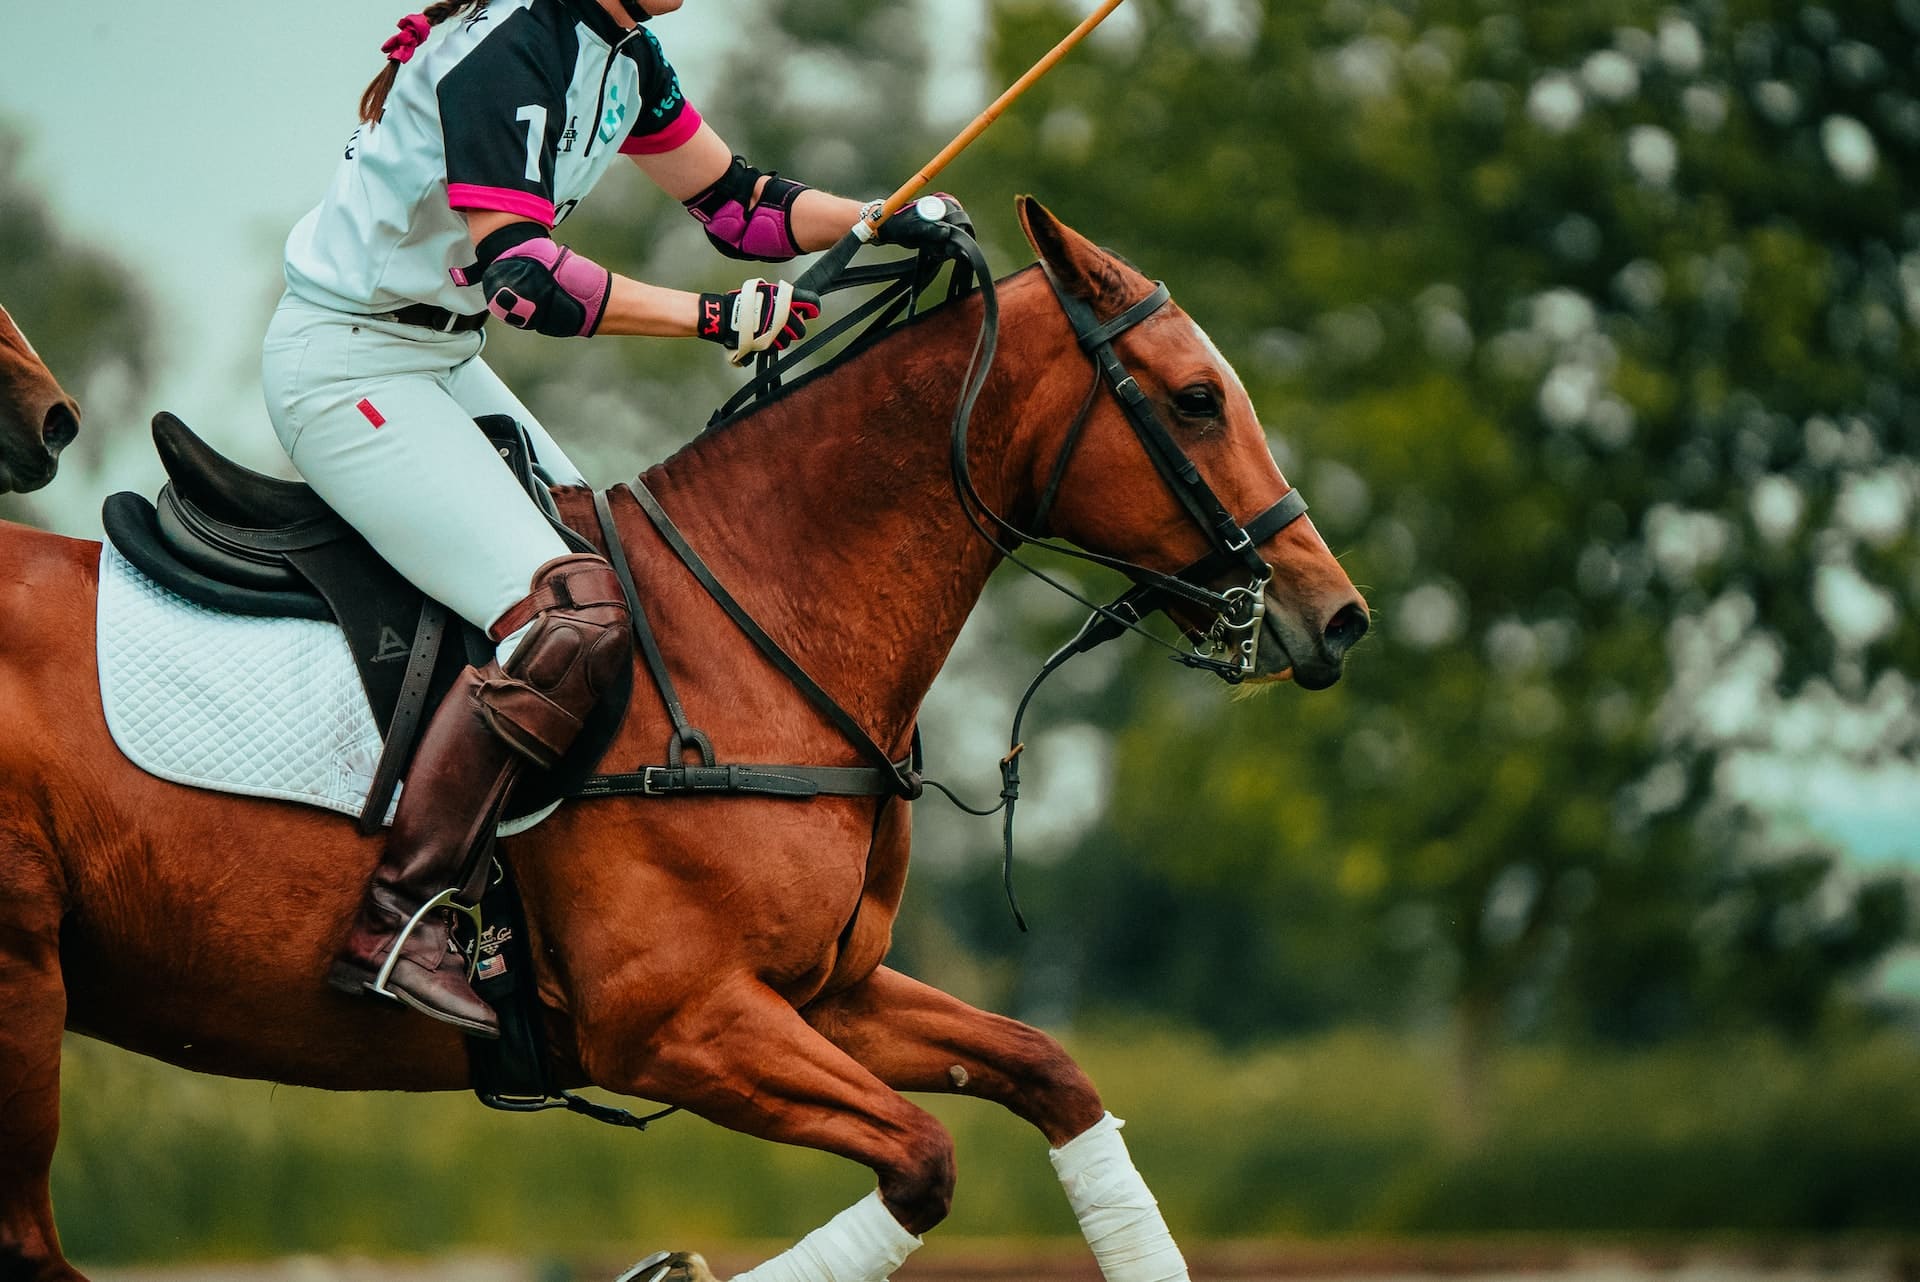 The Best Polo Tournaments in the World